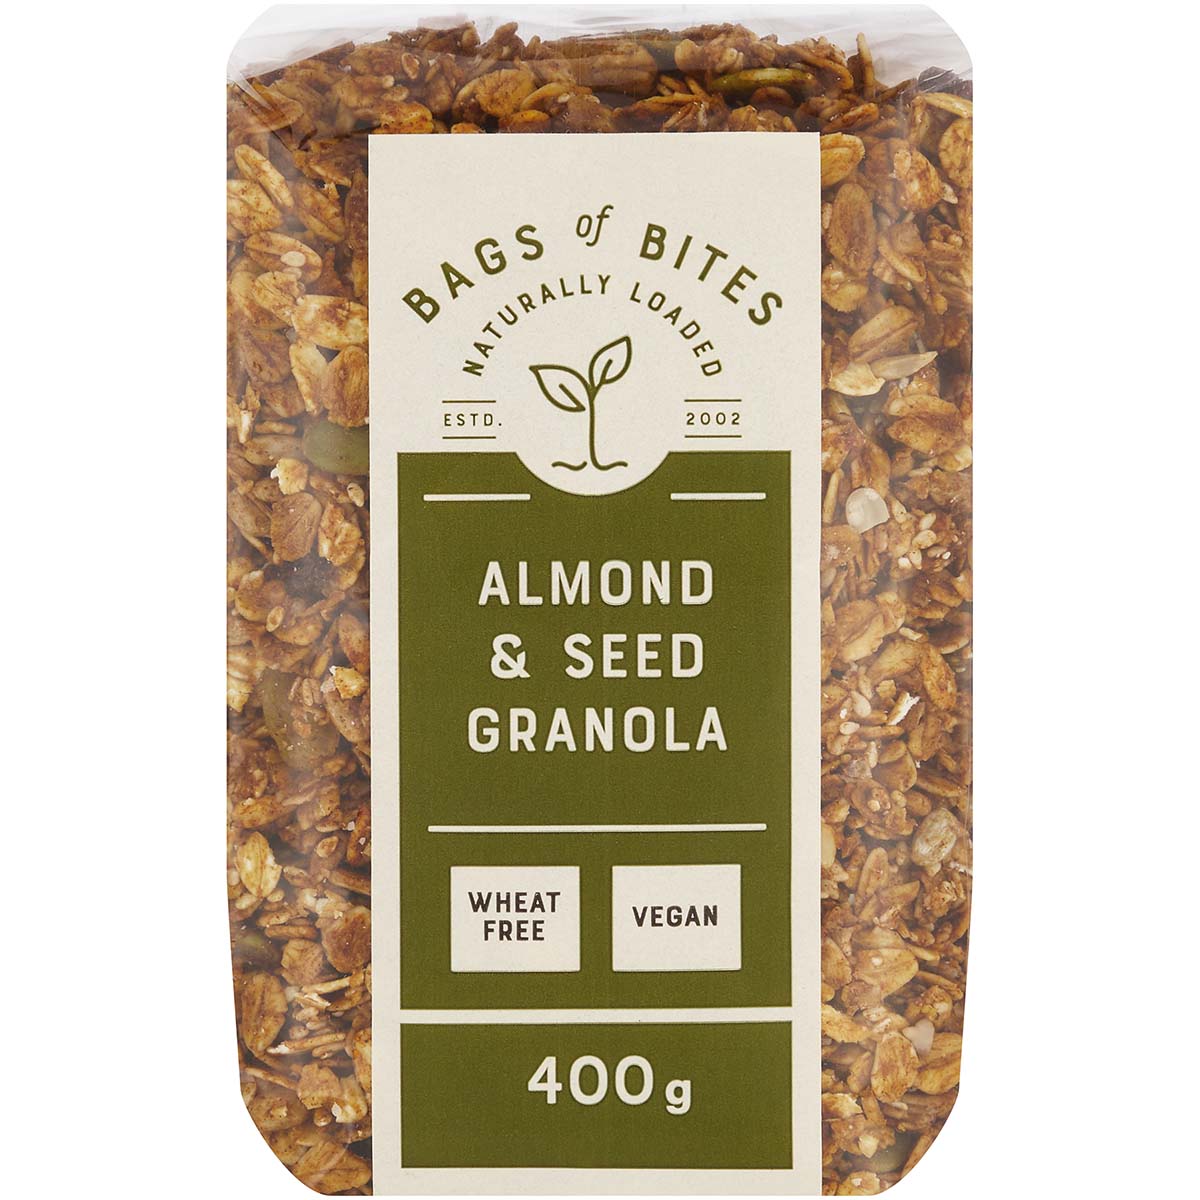 Naturally Loaded - Almond & Seed Granola